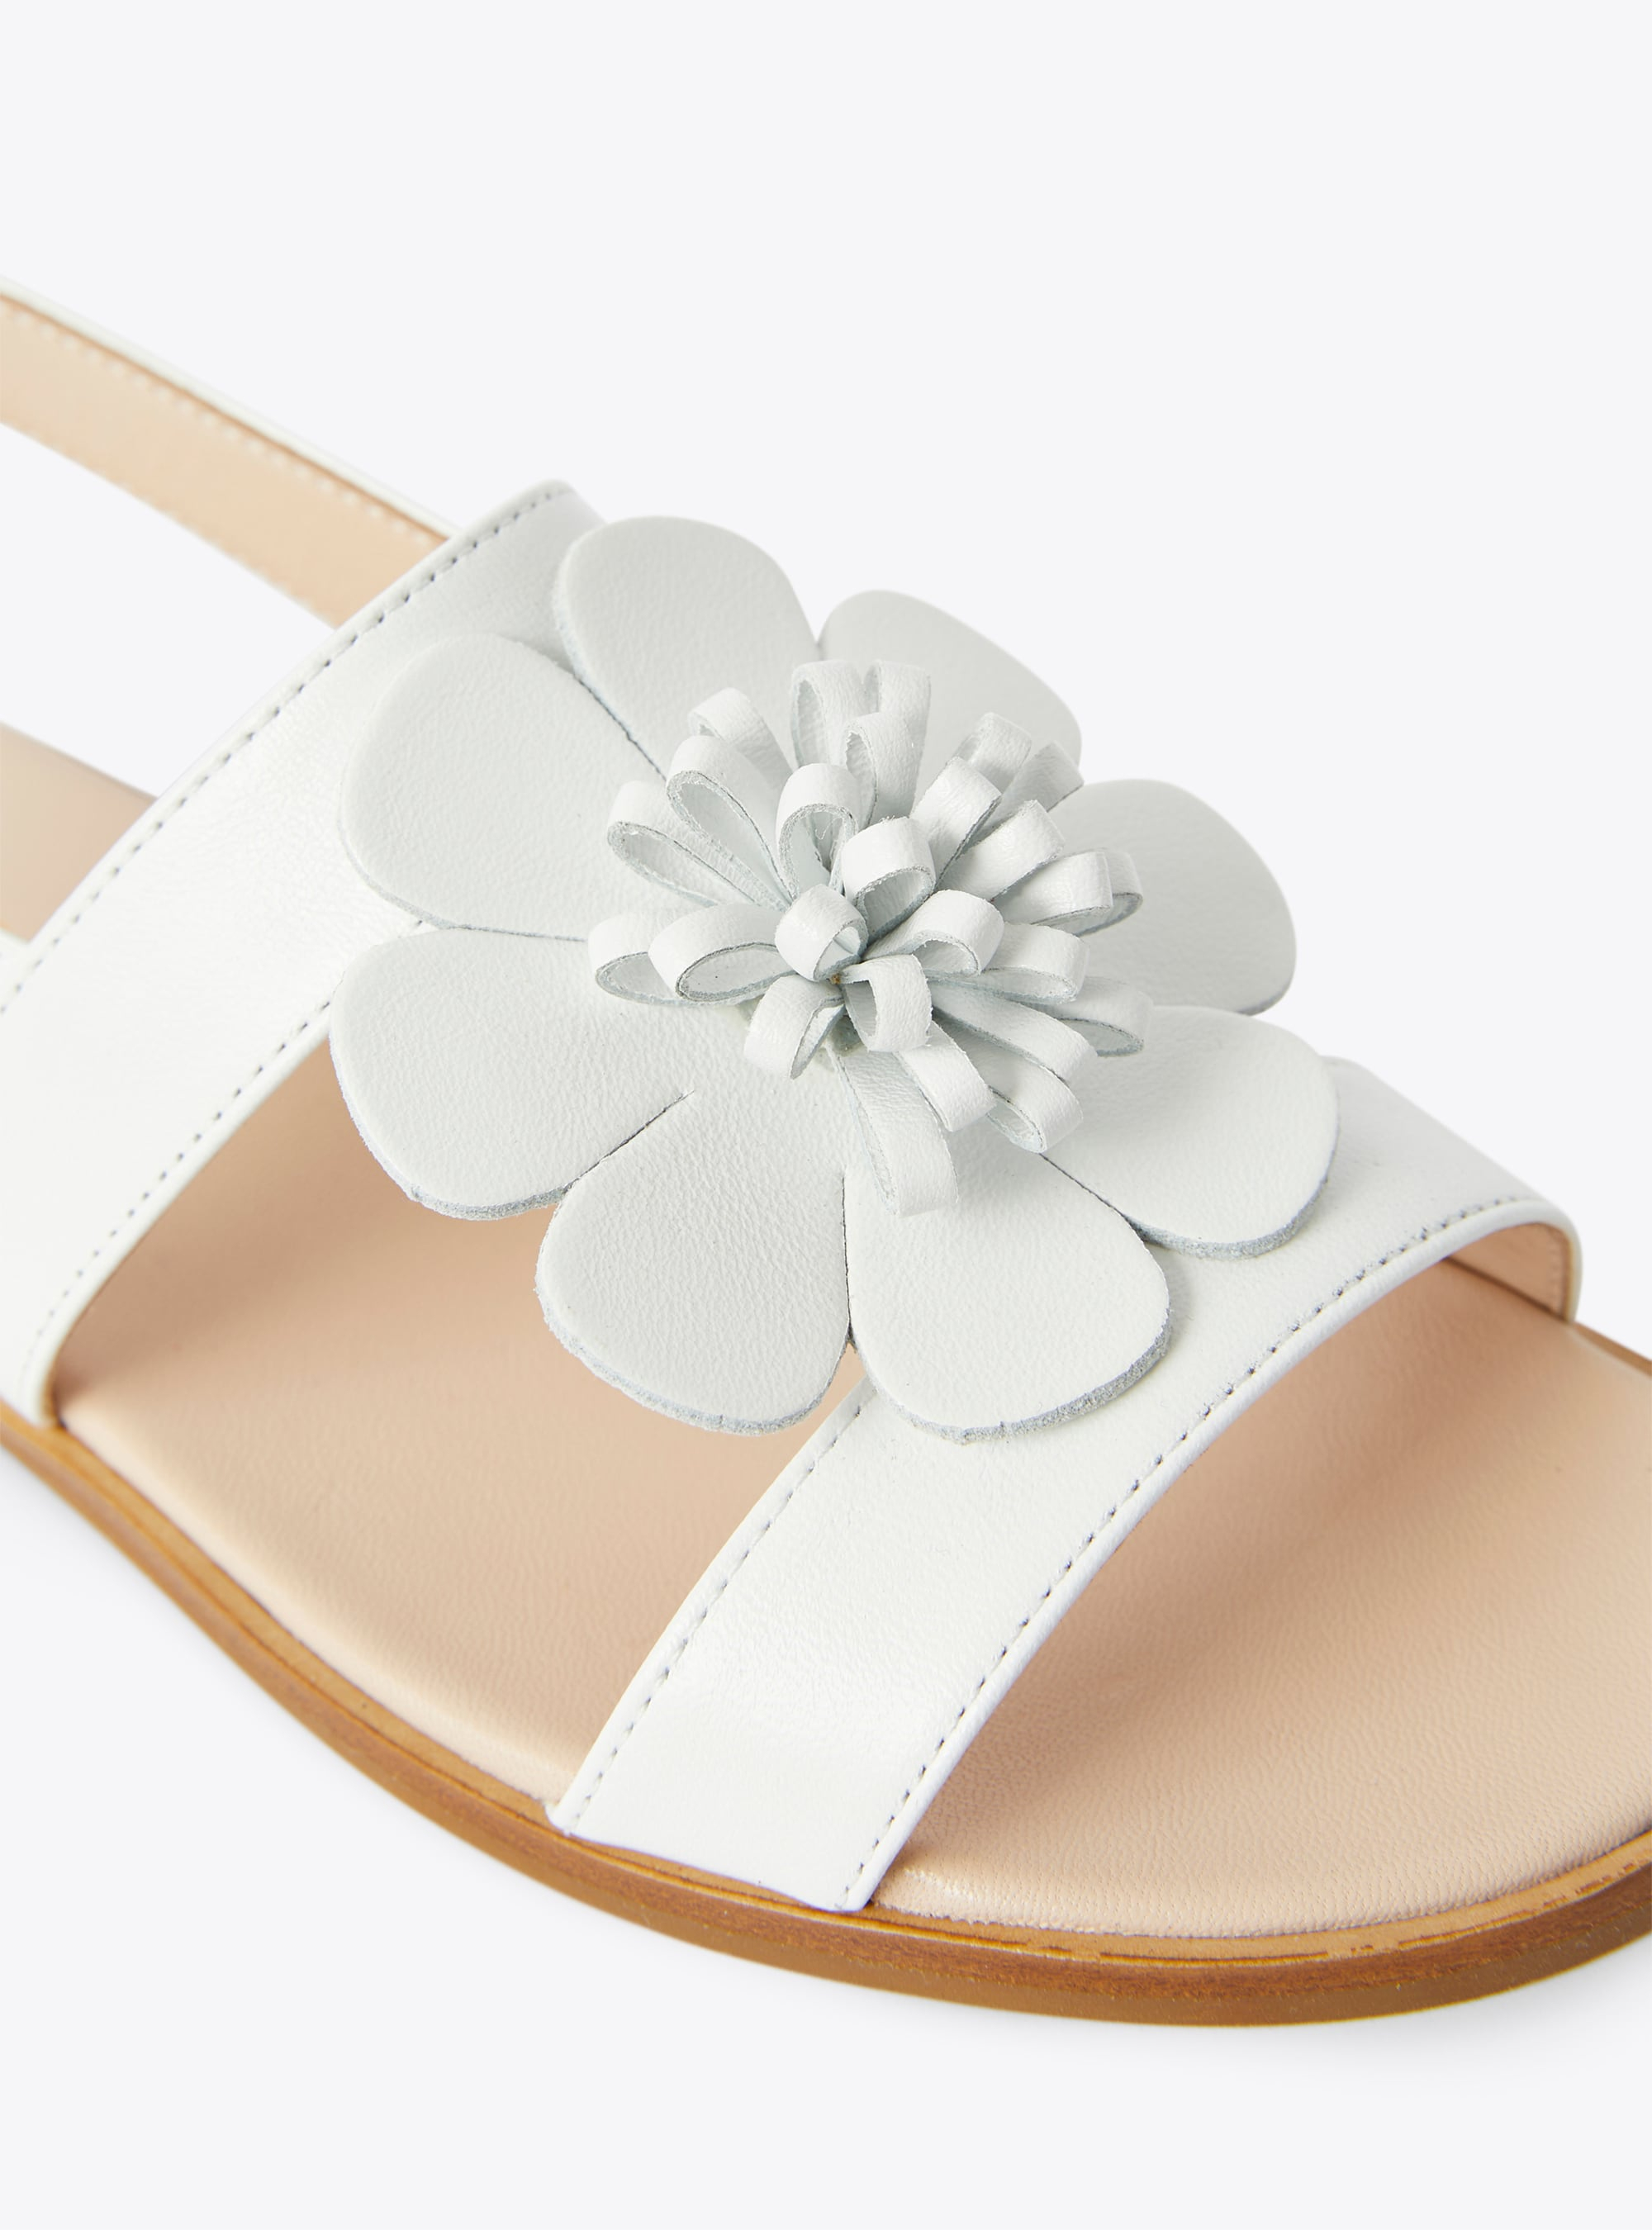 Leather sandal with flower embellishment - White | Il Gufo